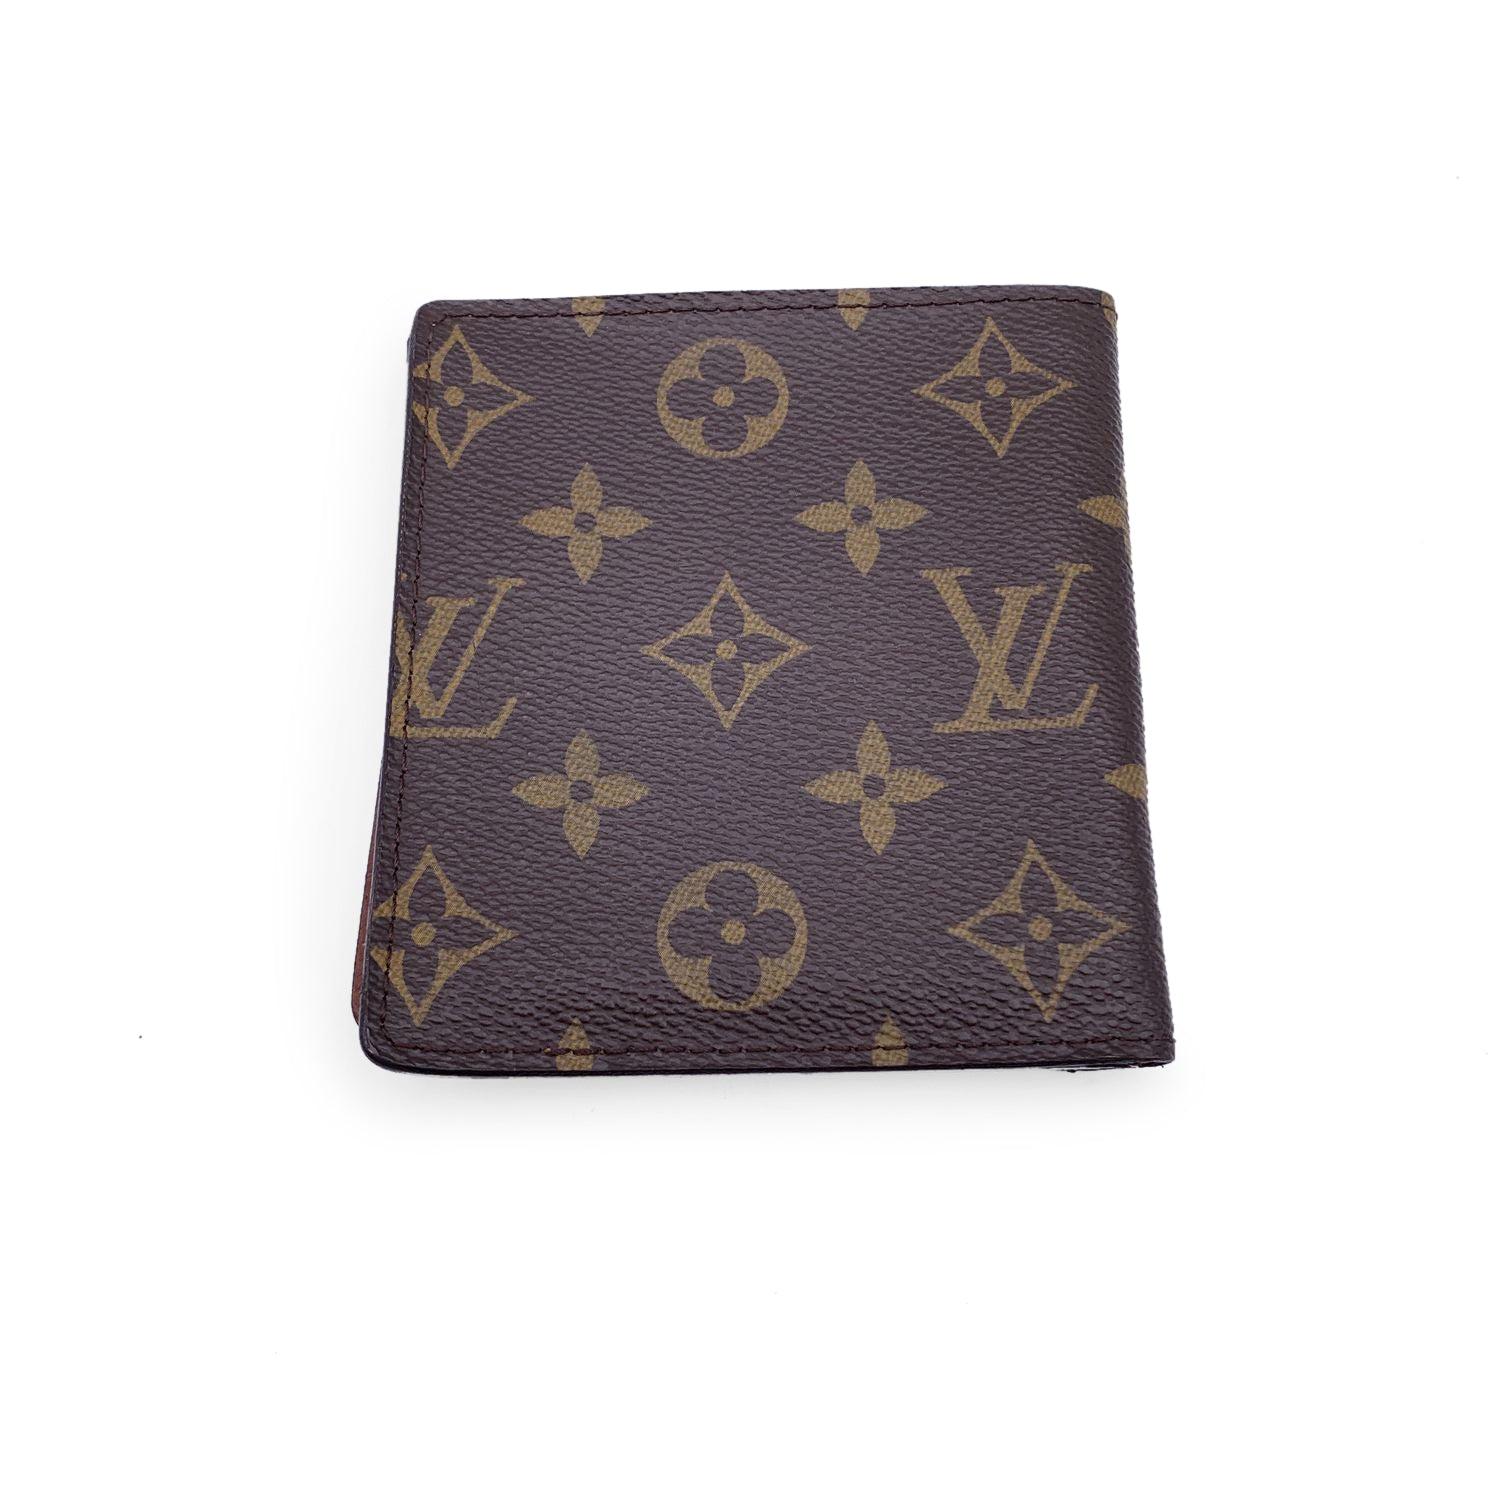 Louis Vuitton monogram canvas Bifold Wallet Credit Card Holder. Bifold design. 1 bill compartment, 10 credit card slots inside. Leather lining. 'LOUIS VUITTON Paris - made in France' embossed inside. Authenticity serial number embossed inside the